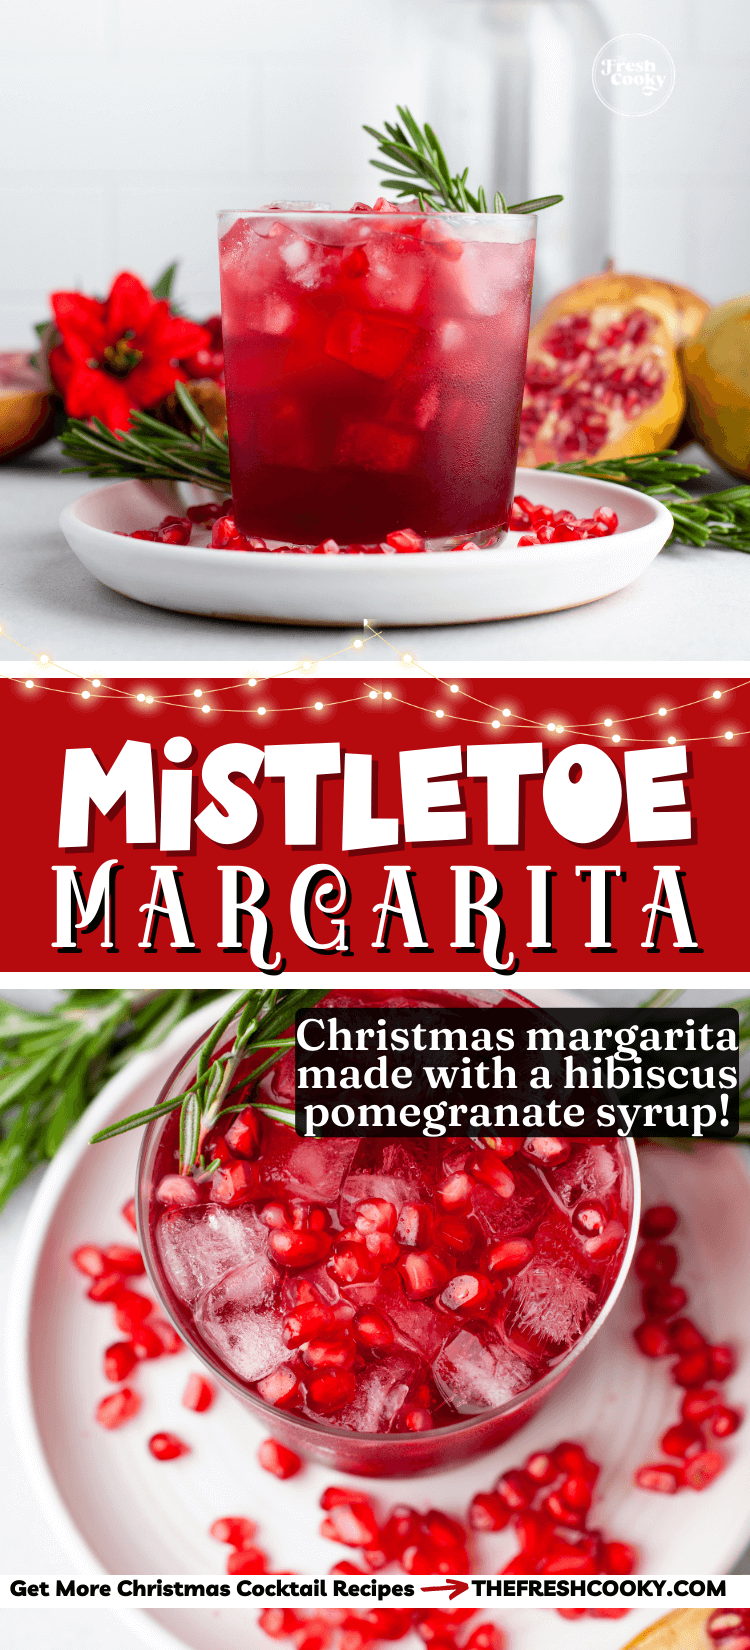 Mistletoe Margarita on a plate garnished with extra pomegranate arils and a sprig of rosemary, to pin.